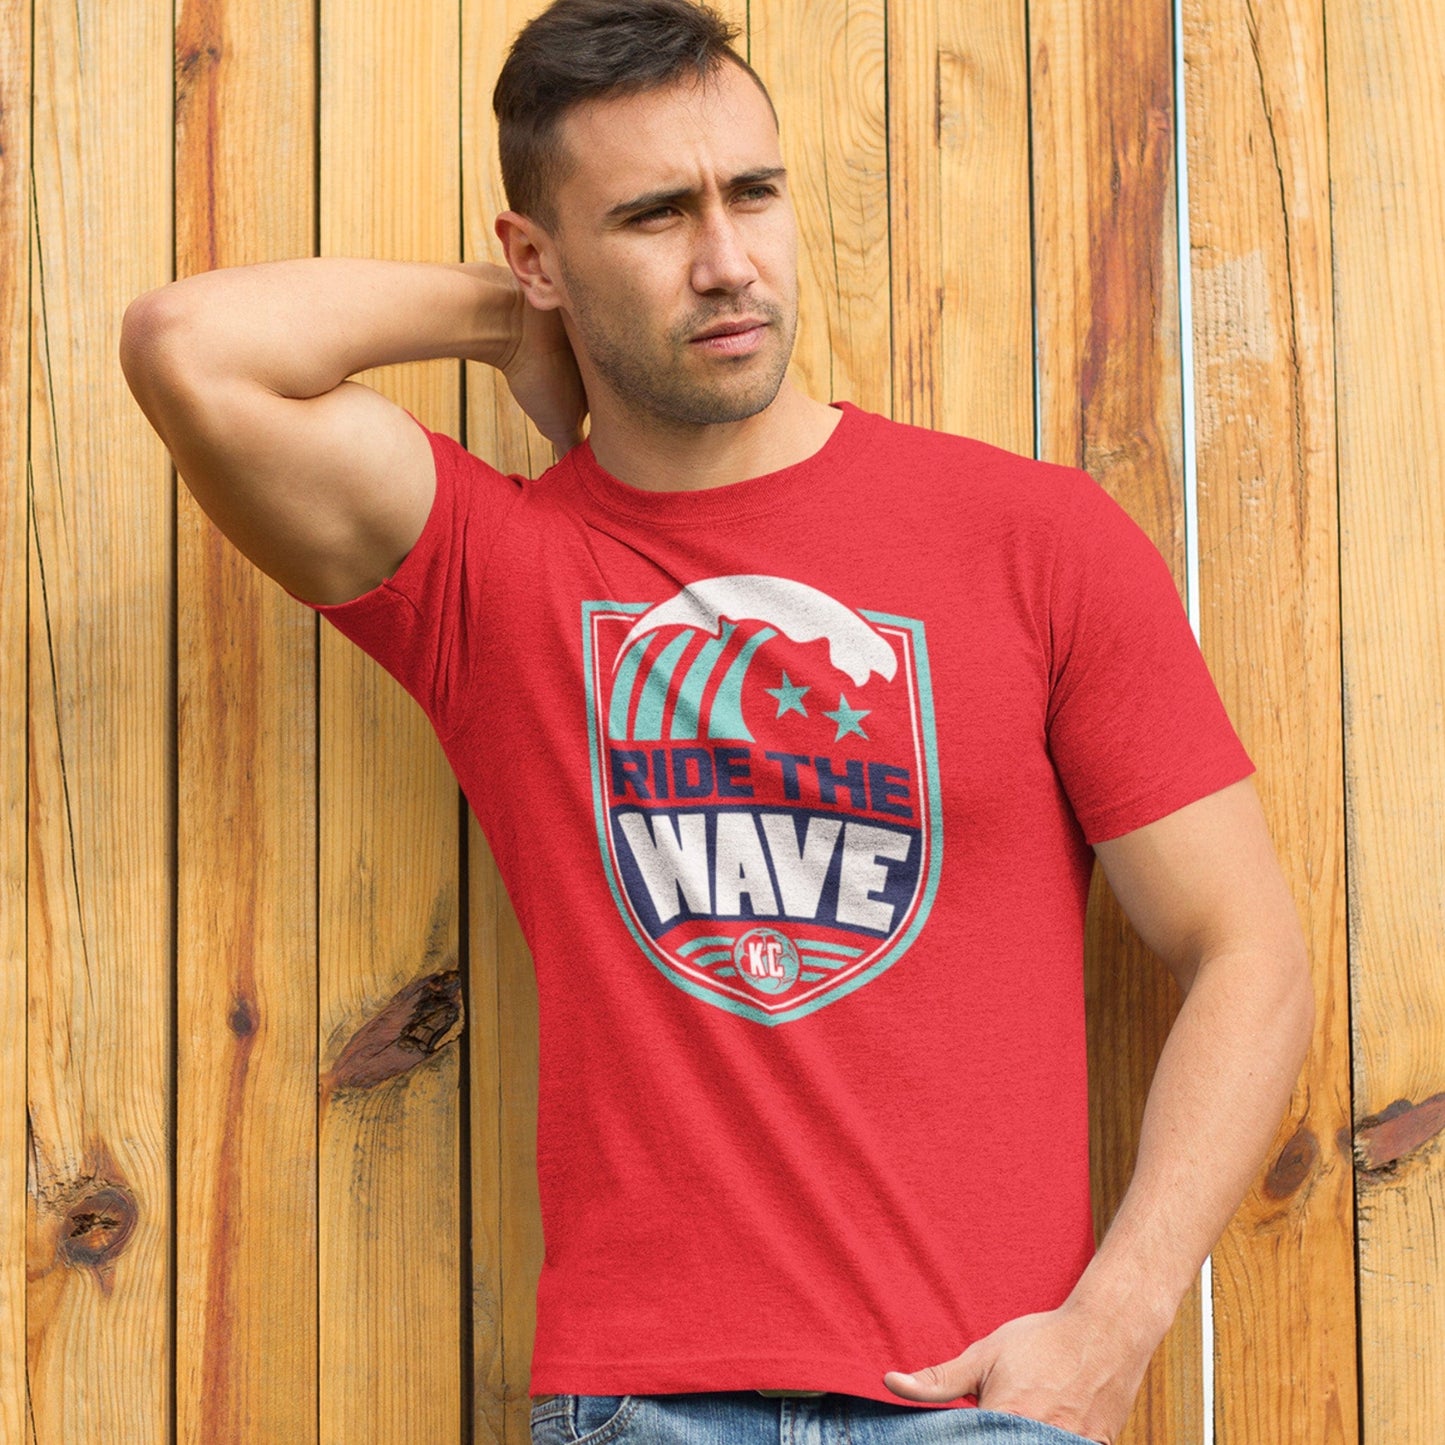 KC Swag Kansas City Current RIDE THE WAVE on heather red unisex t-shirt worn by male model standing in front of yellow wooden fence